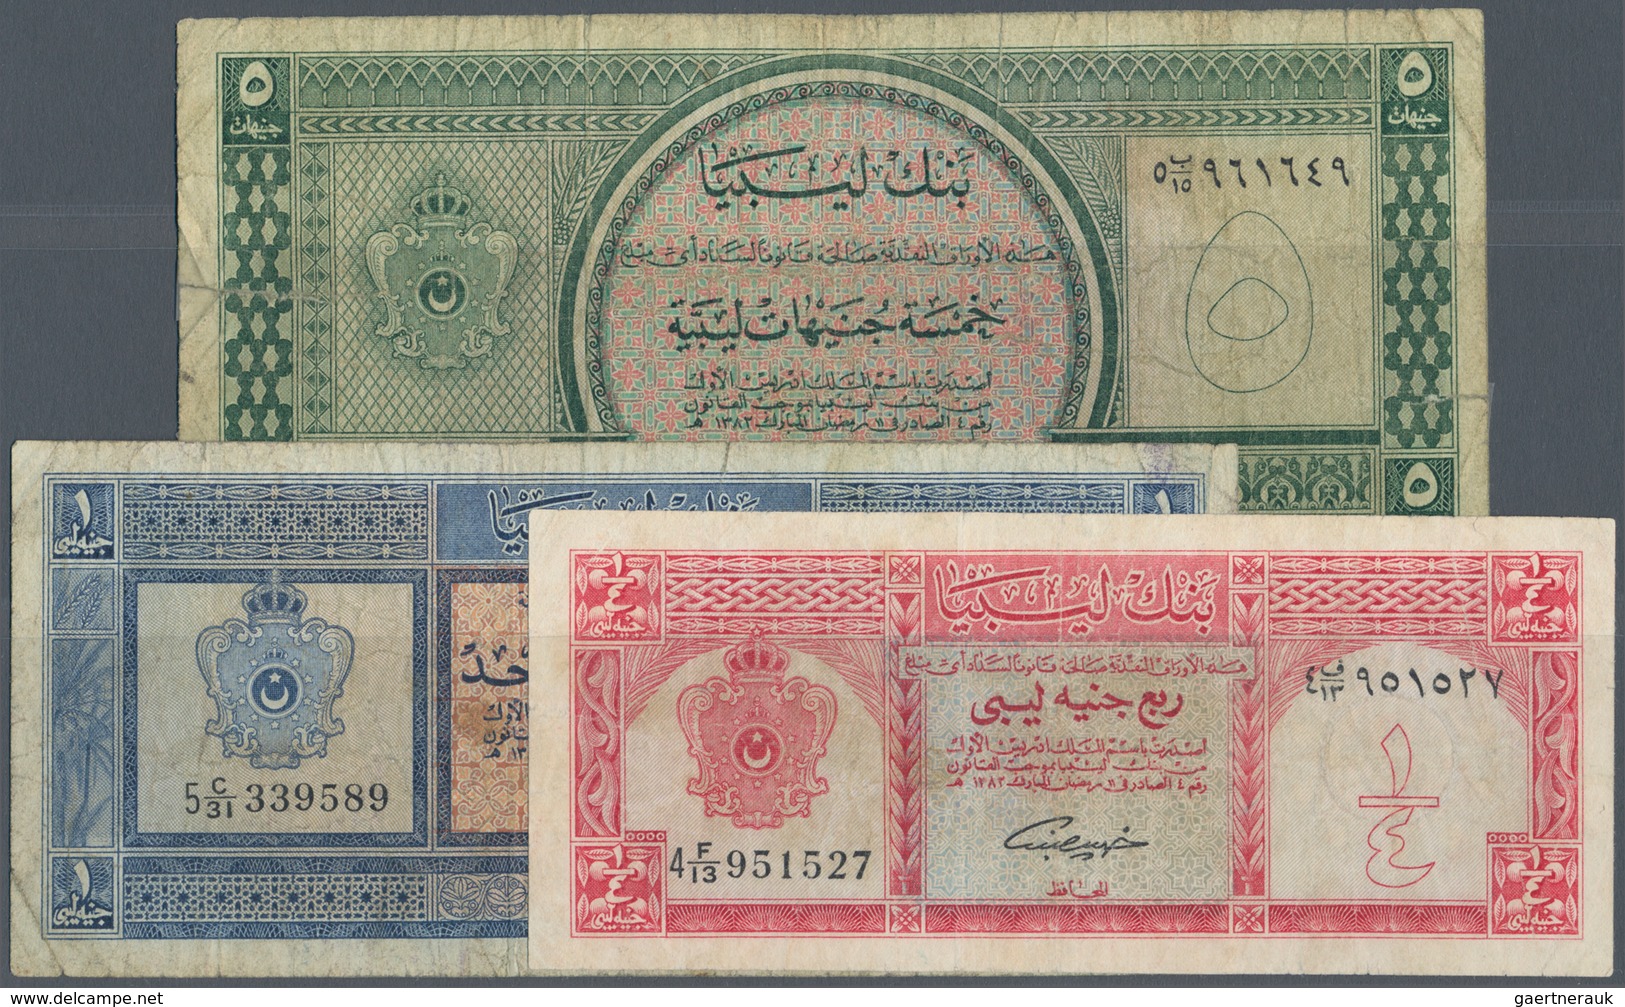 Libya / Libyen: Set Of 3 Banknotes Containing 1/4, 1 & 5 Pounds L.1963 P. 28, 30, 31, All Used With - Libia